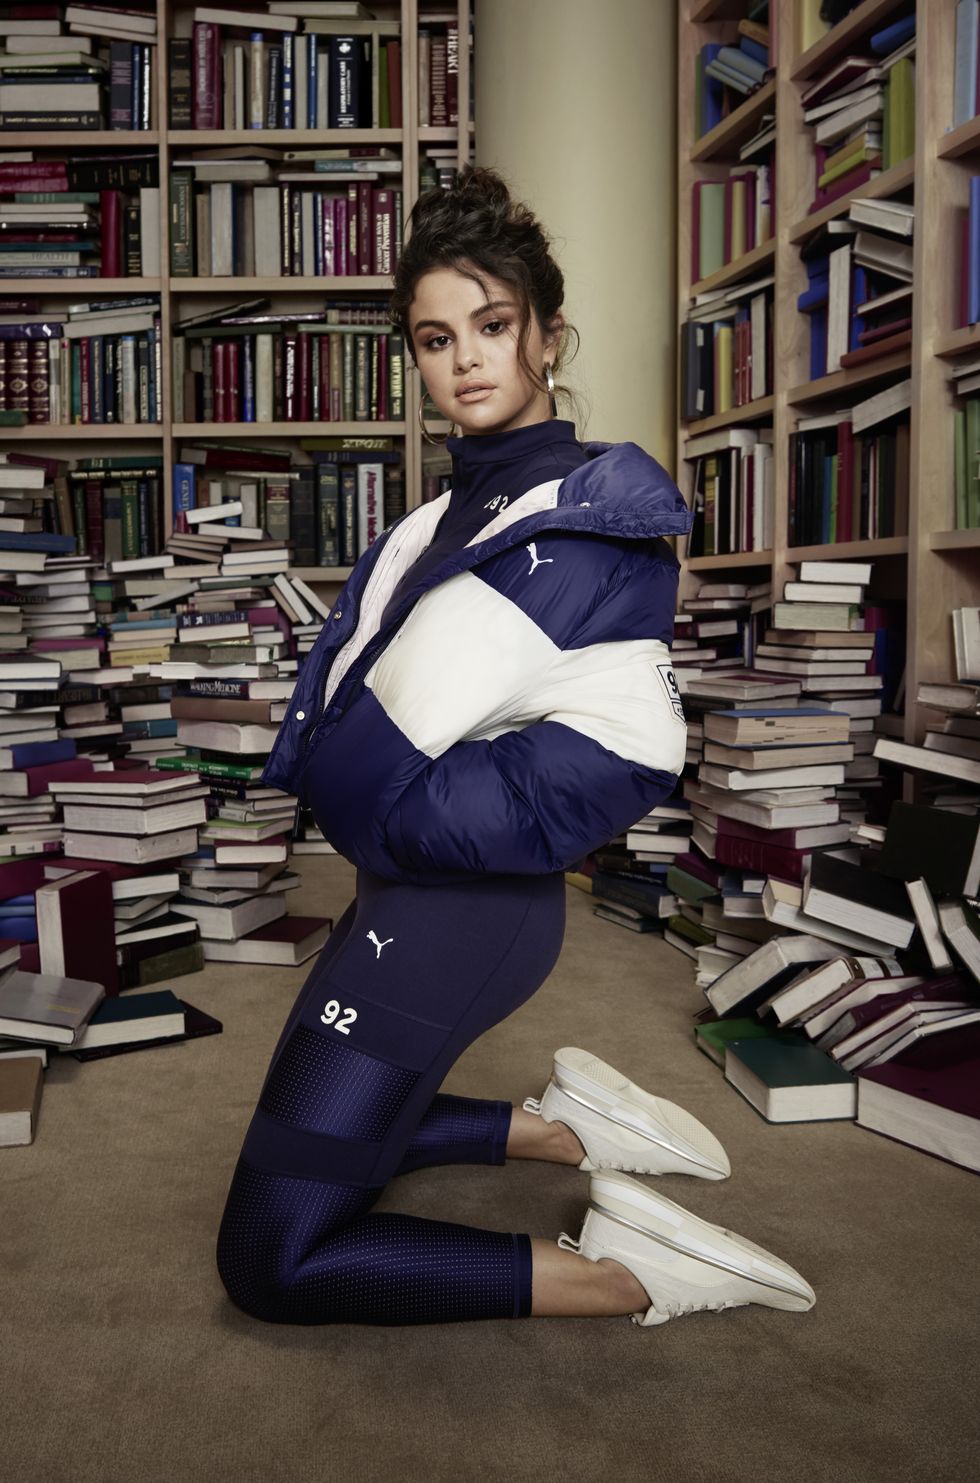 Selena Gomez Hid Meaningful Symbols in Her New Puma Clothing Line